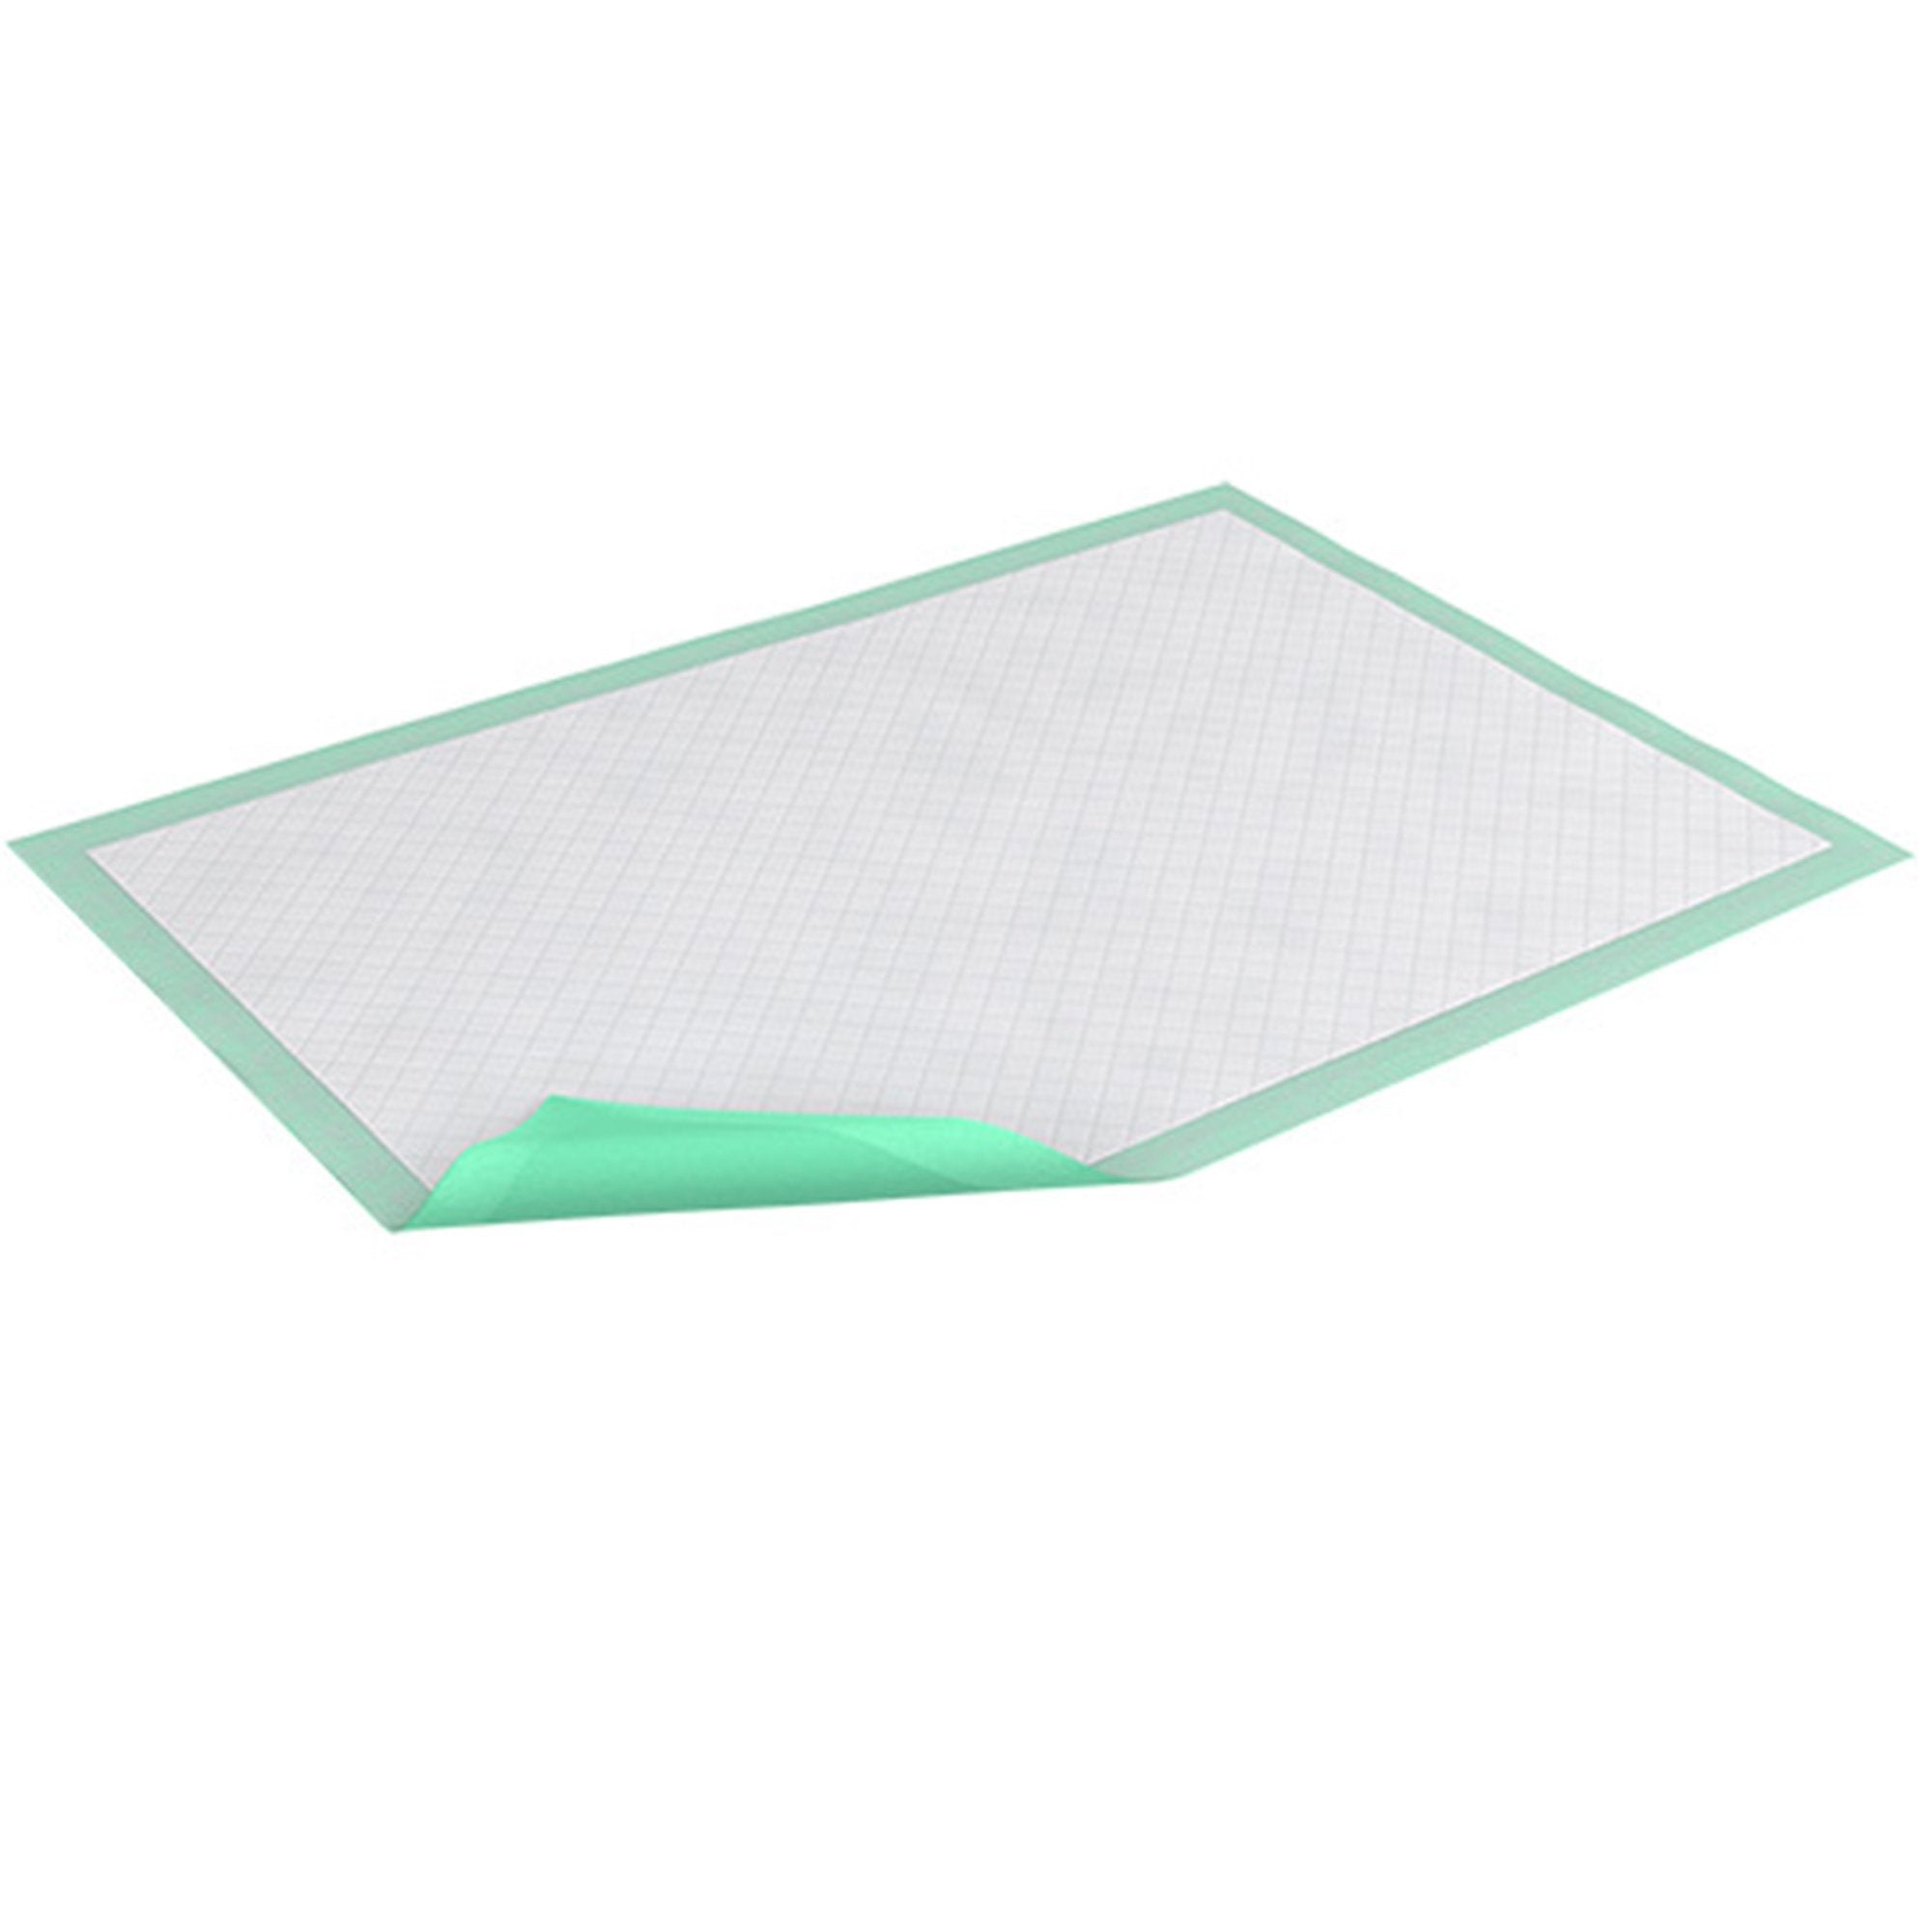 Disposable Underpad TENA® Premium 30 X 30 Inch Super Absorbent Polymer Light Absorbency